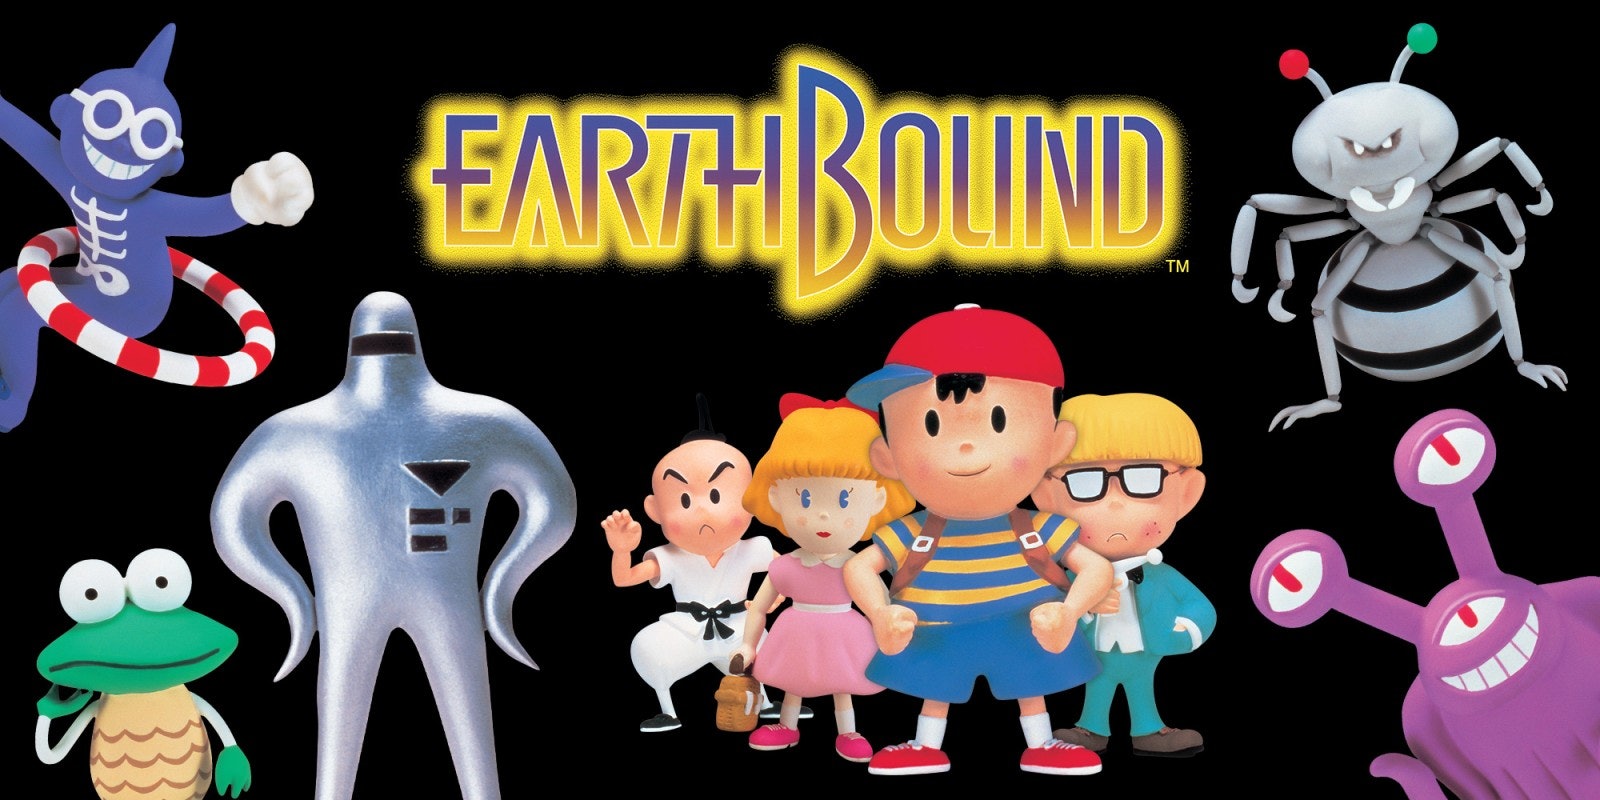 will earthbound come to switch